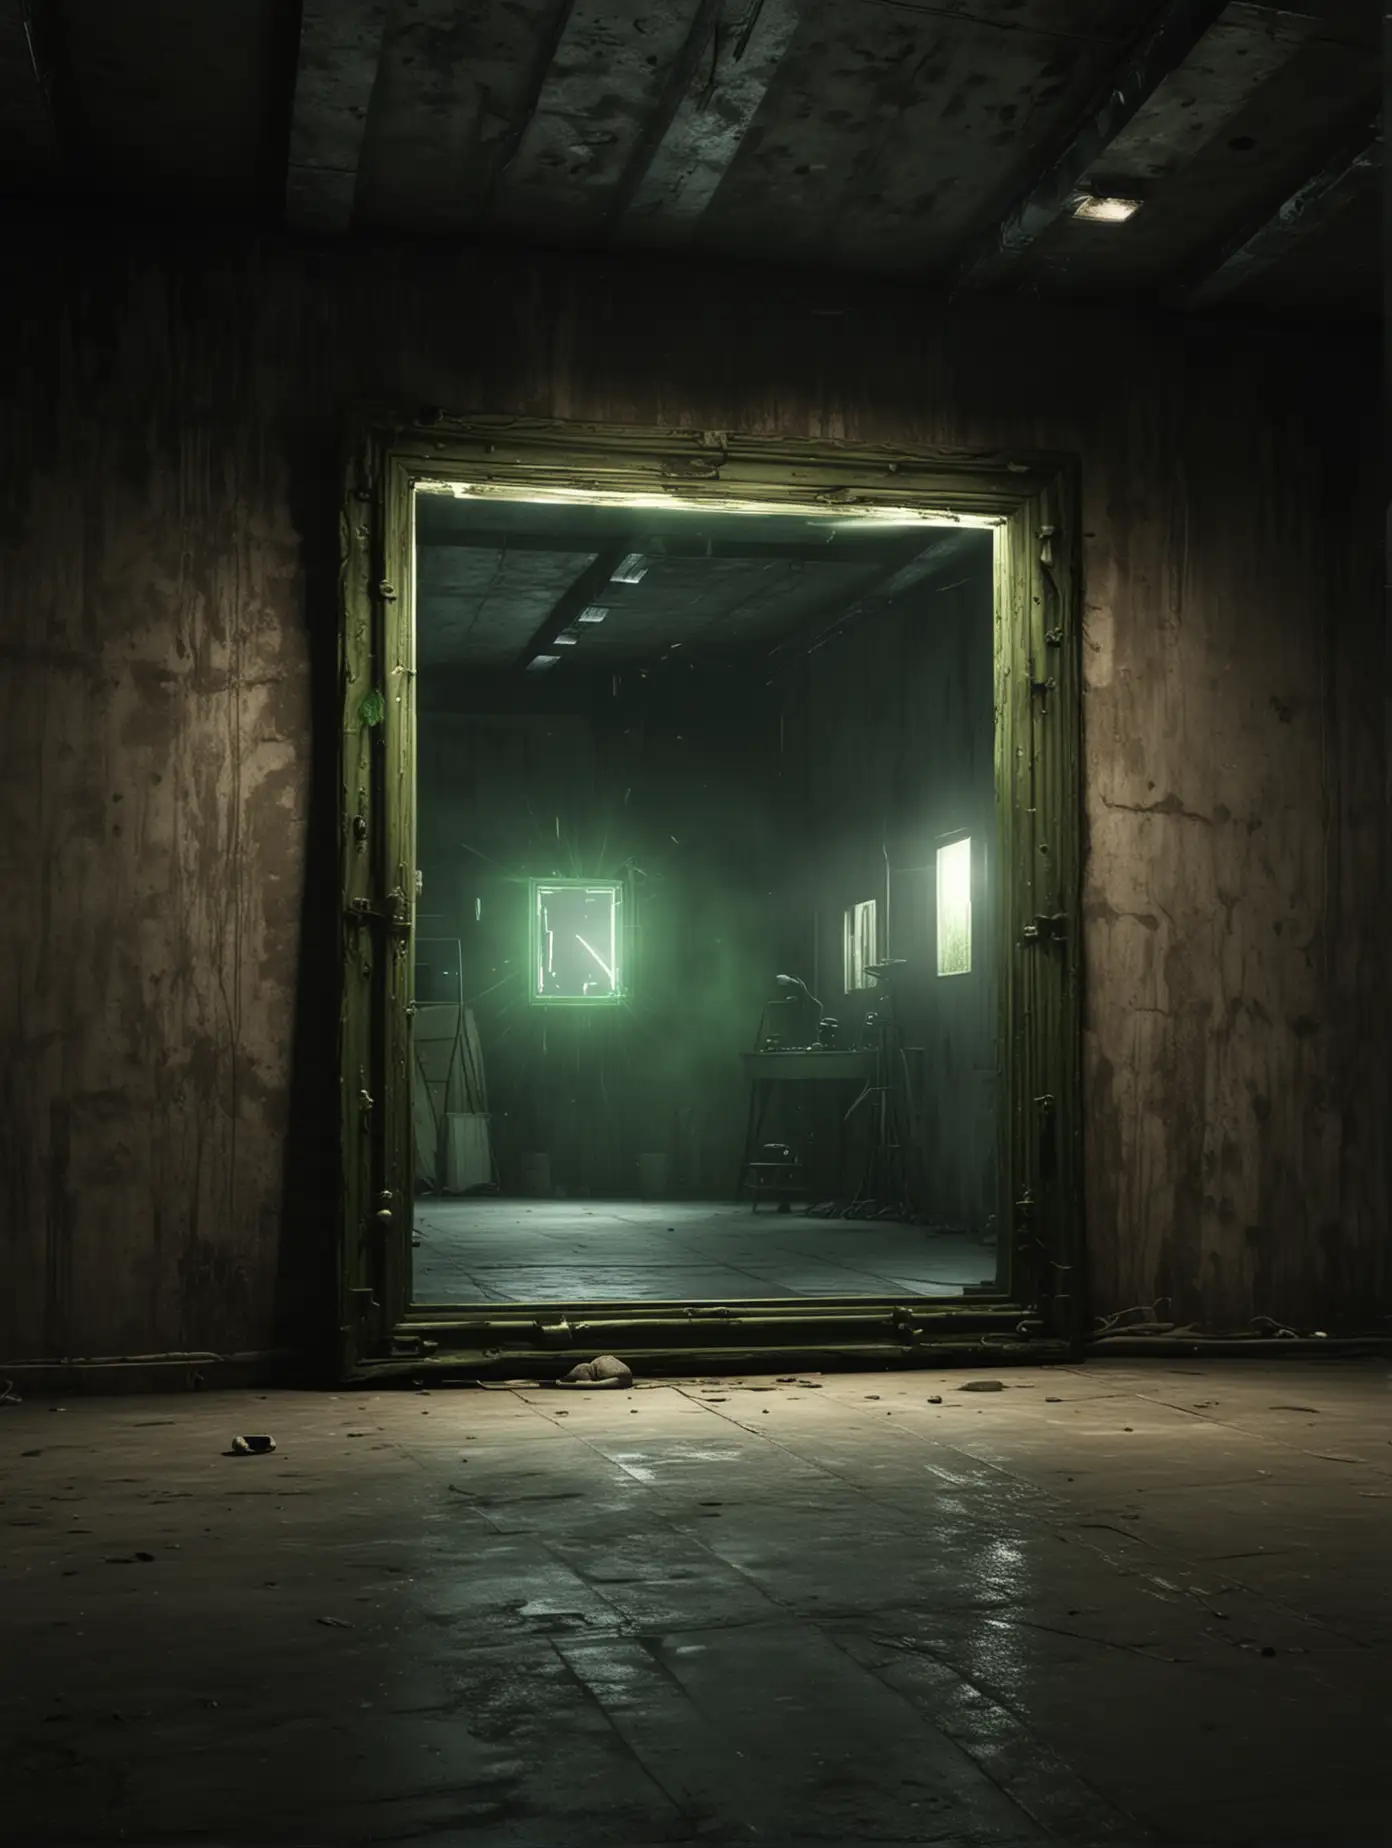 Ultra Realistic Dark Warehouse with Green Laser Reflection in Large Mirror